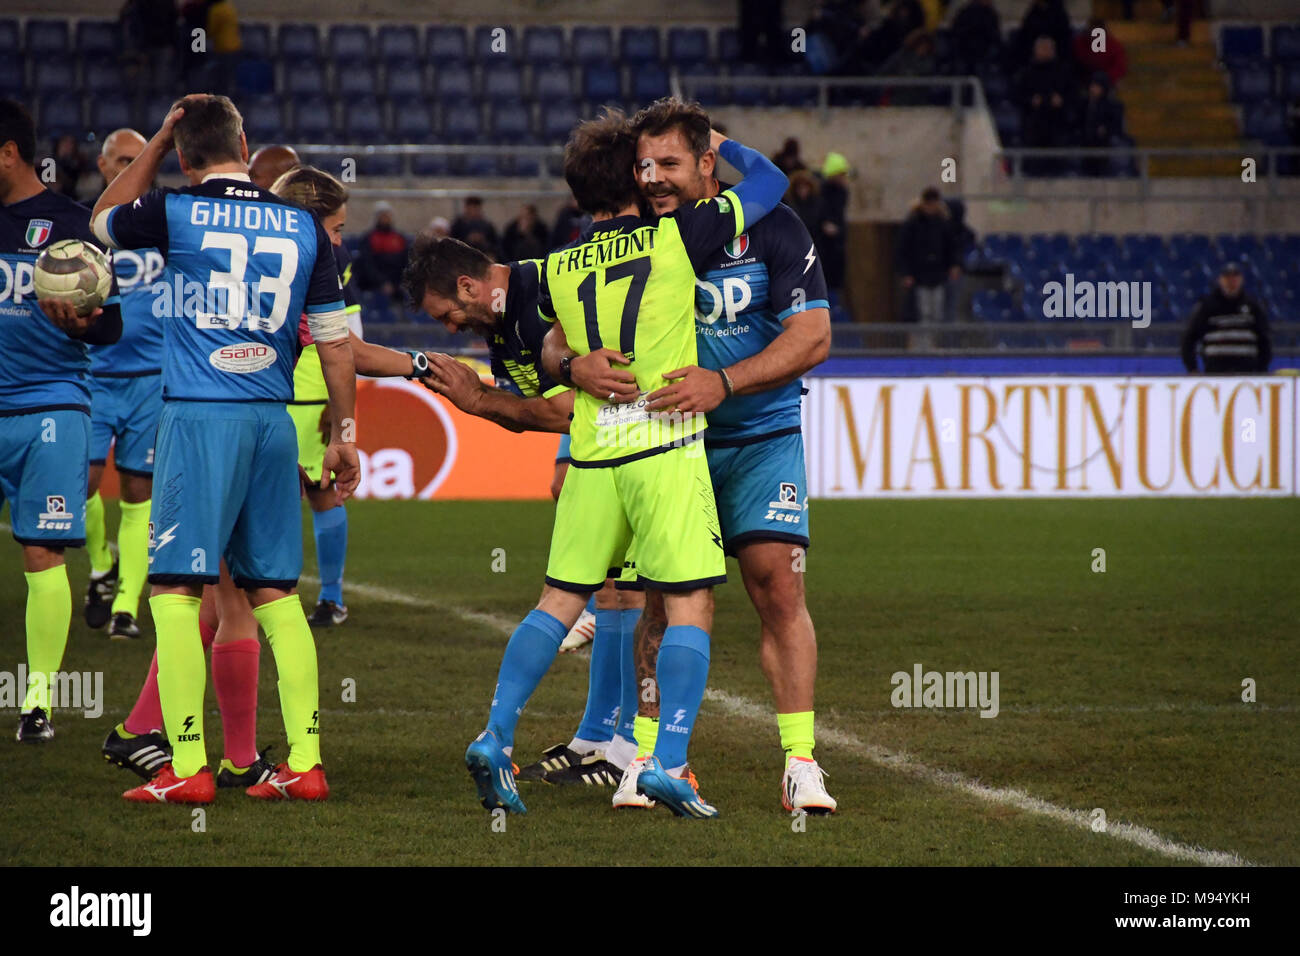 Rome Italy 21 March 2018 Stadio Olimpico - the mundial matchL, ITALY REST OF THE WORLD, Andrea Lo Cicero e Ludovico Fremont end of the game Credit: Giuseppe Andidero/Alamy Live News Stock Photo